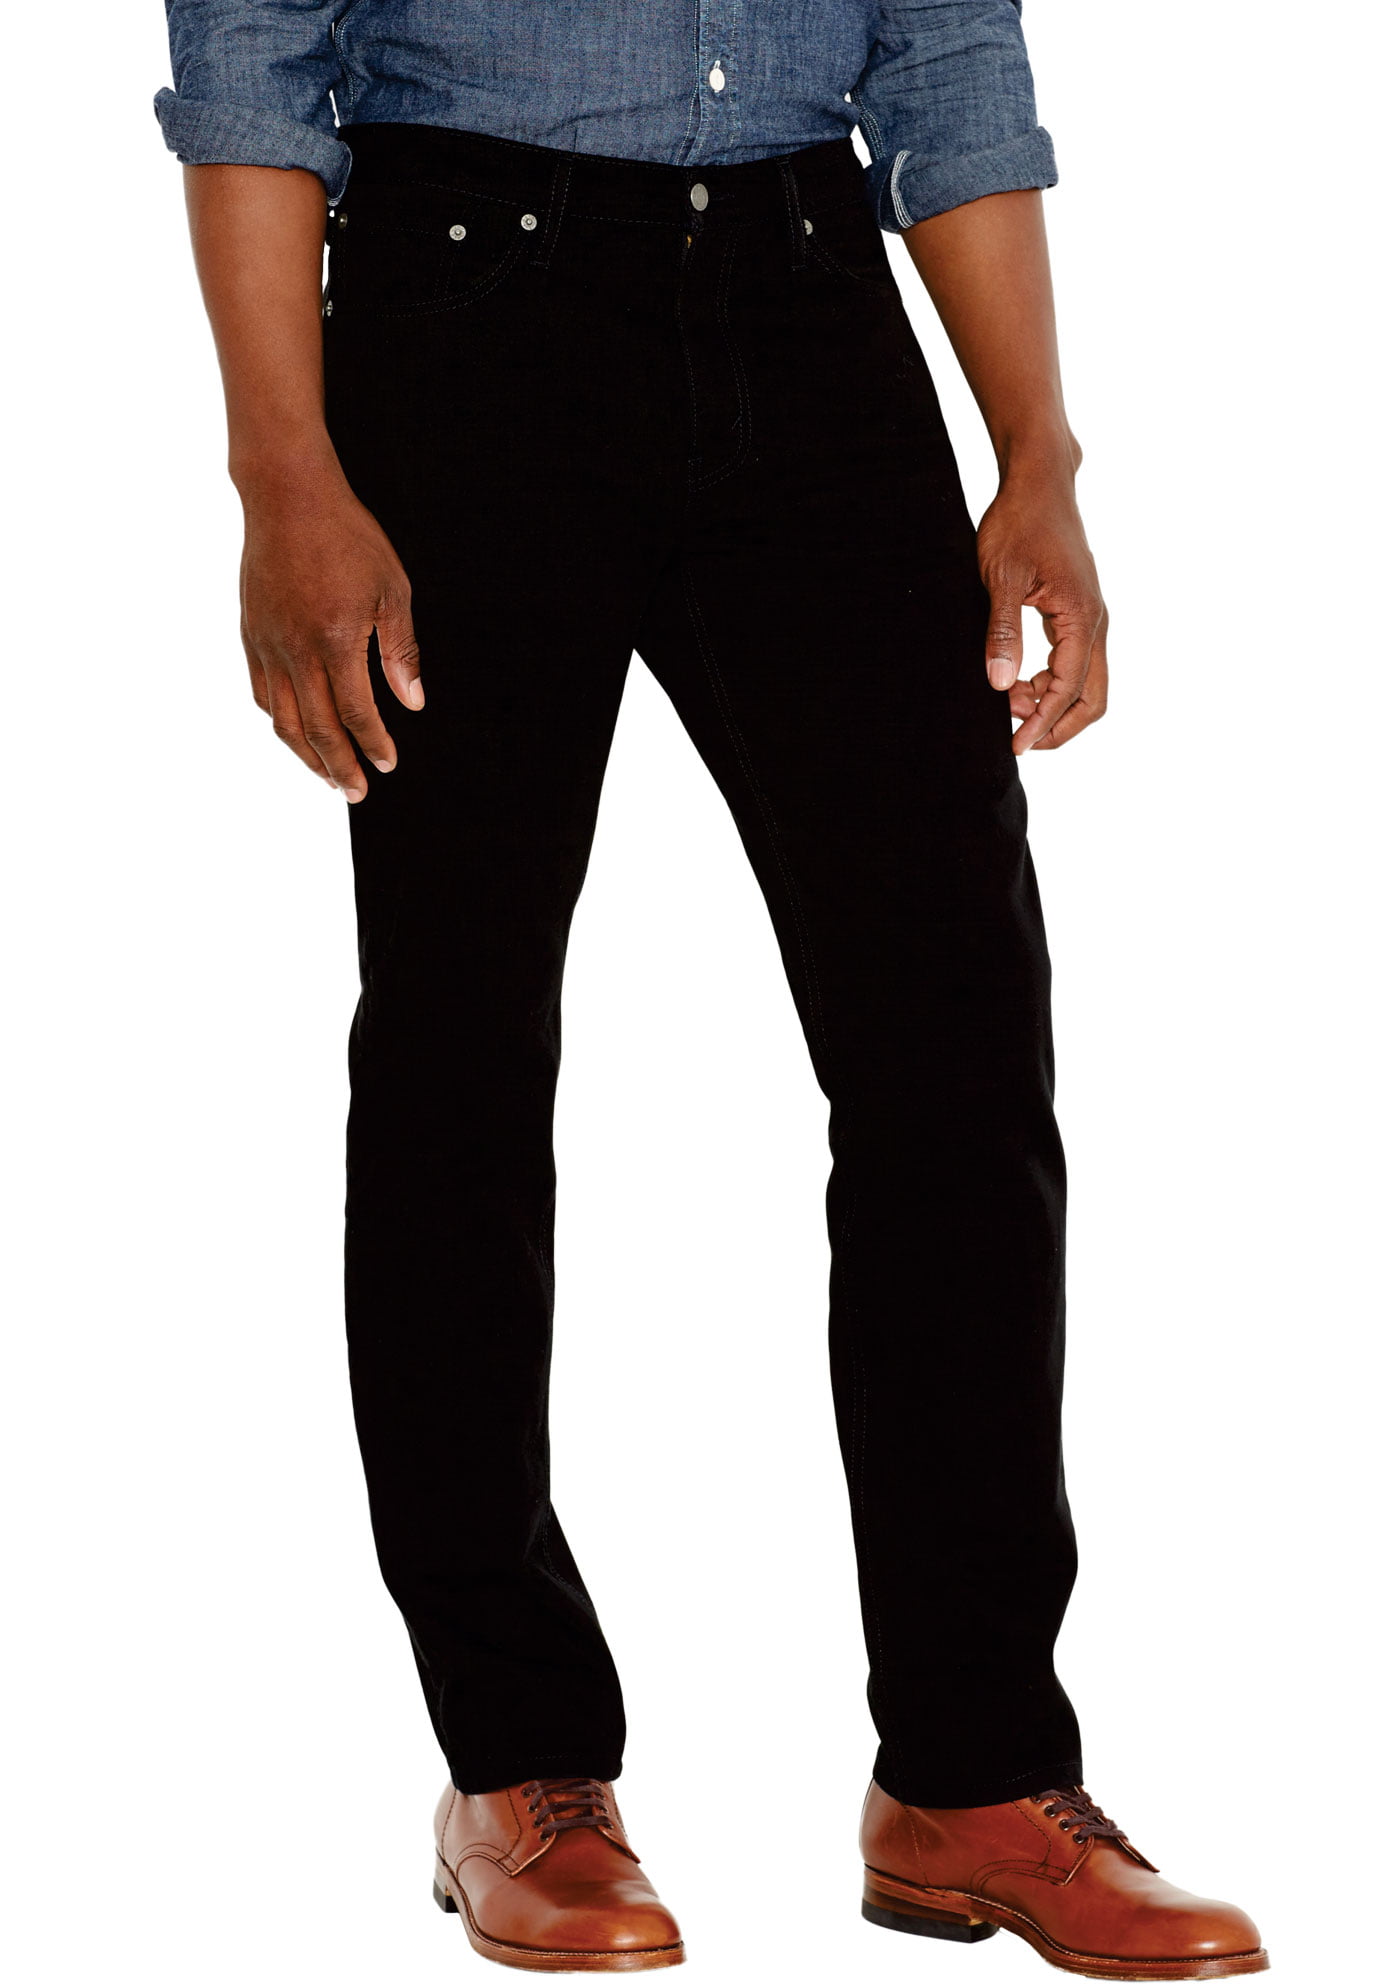 Levi 541 Jeans Big And Tall Sales, Save 55% 